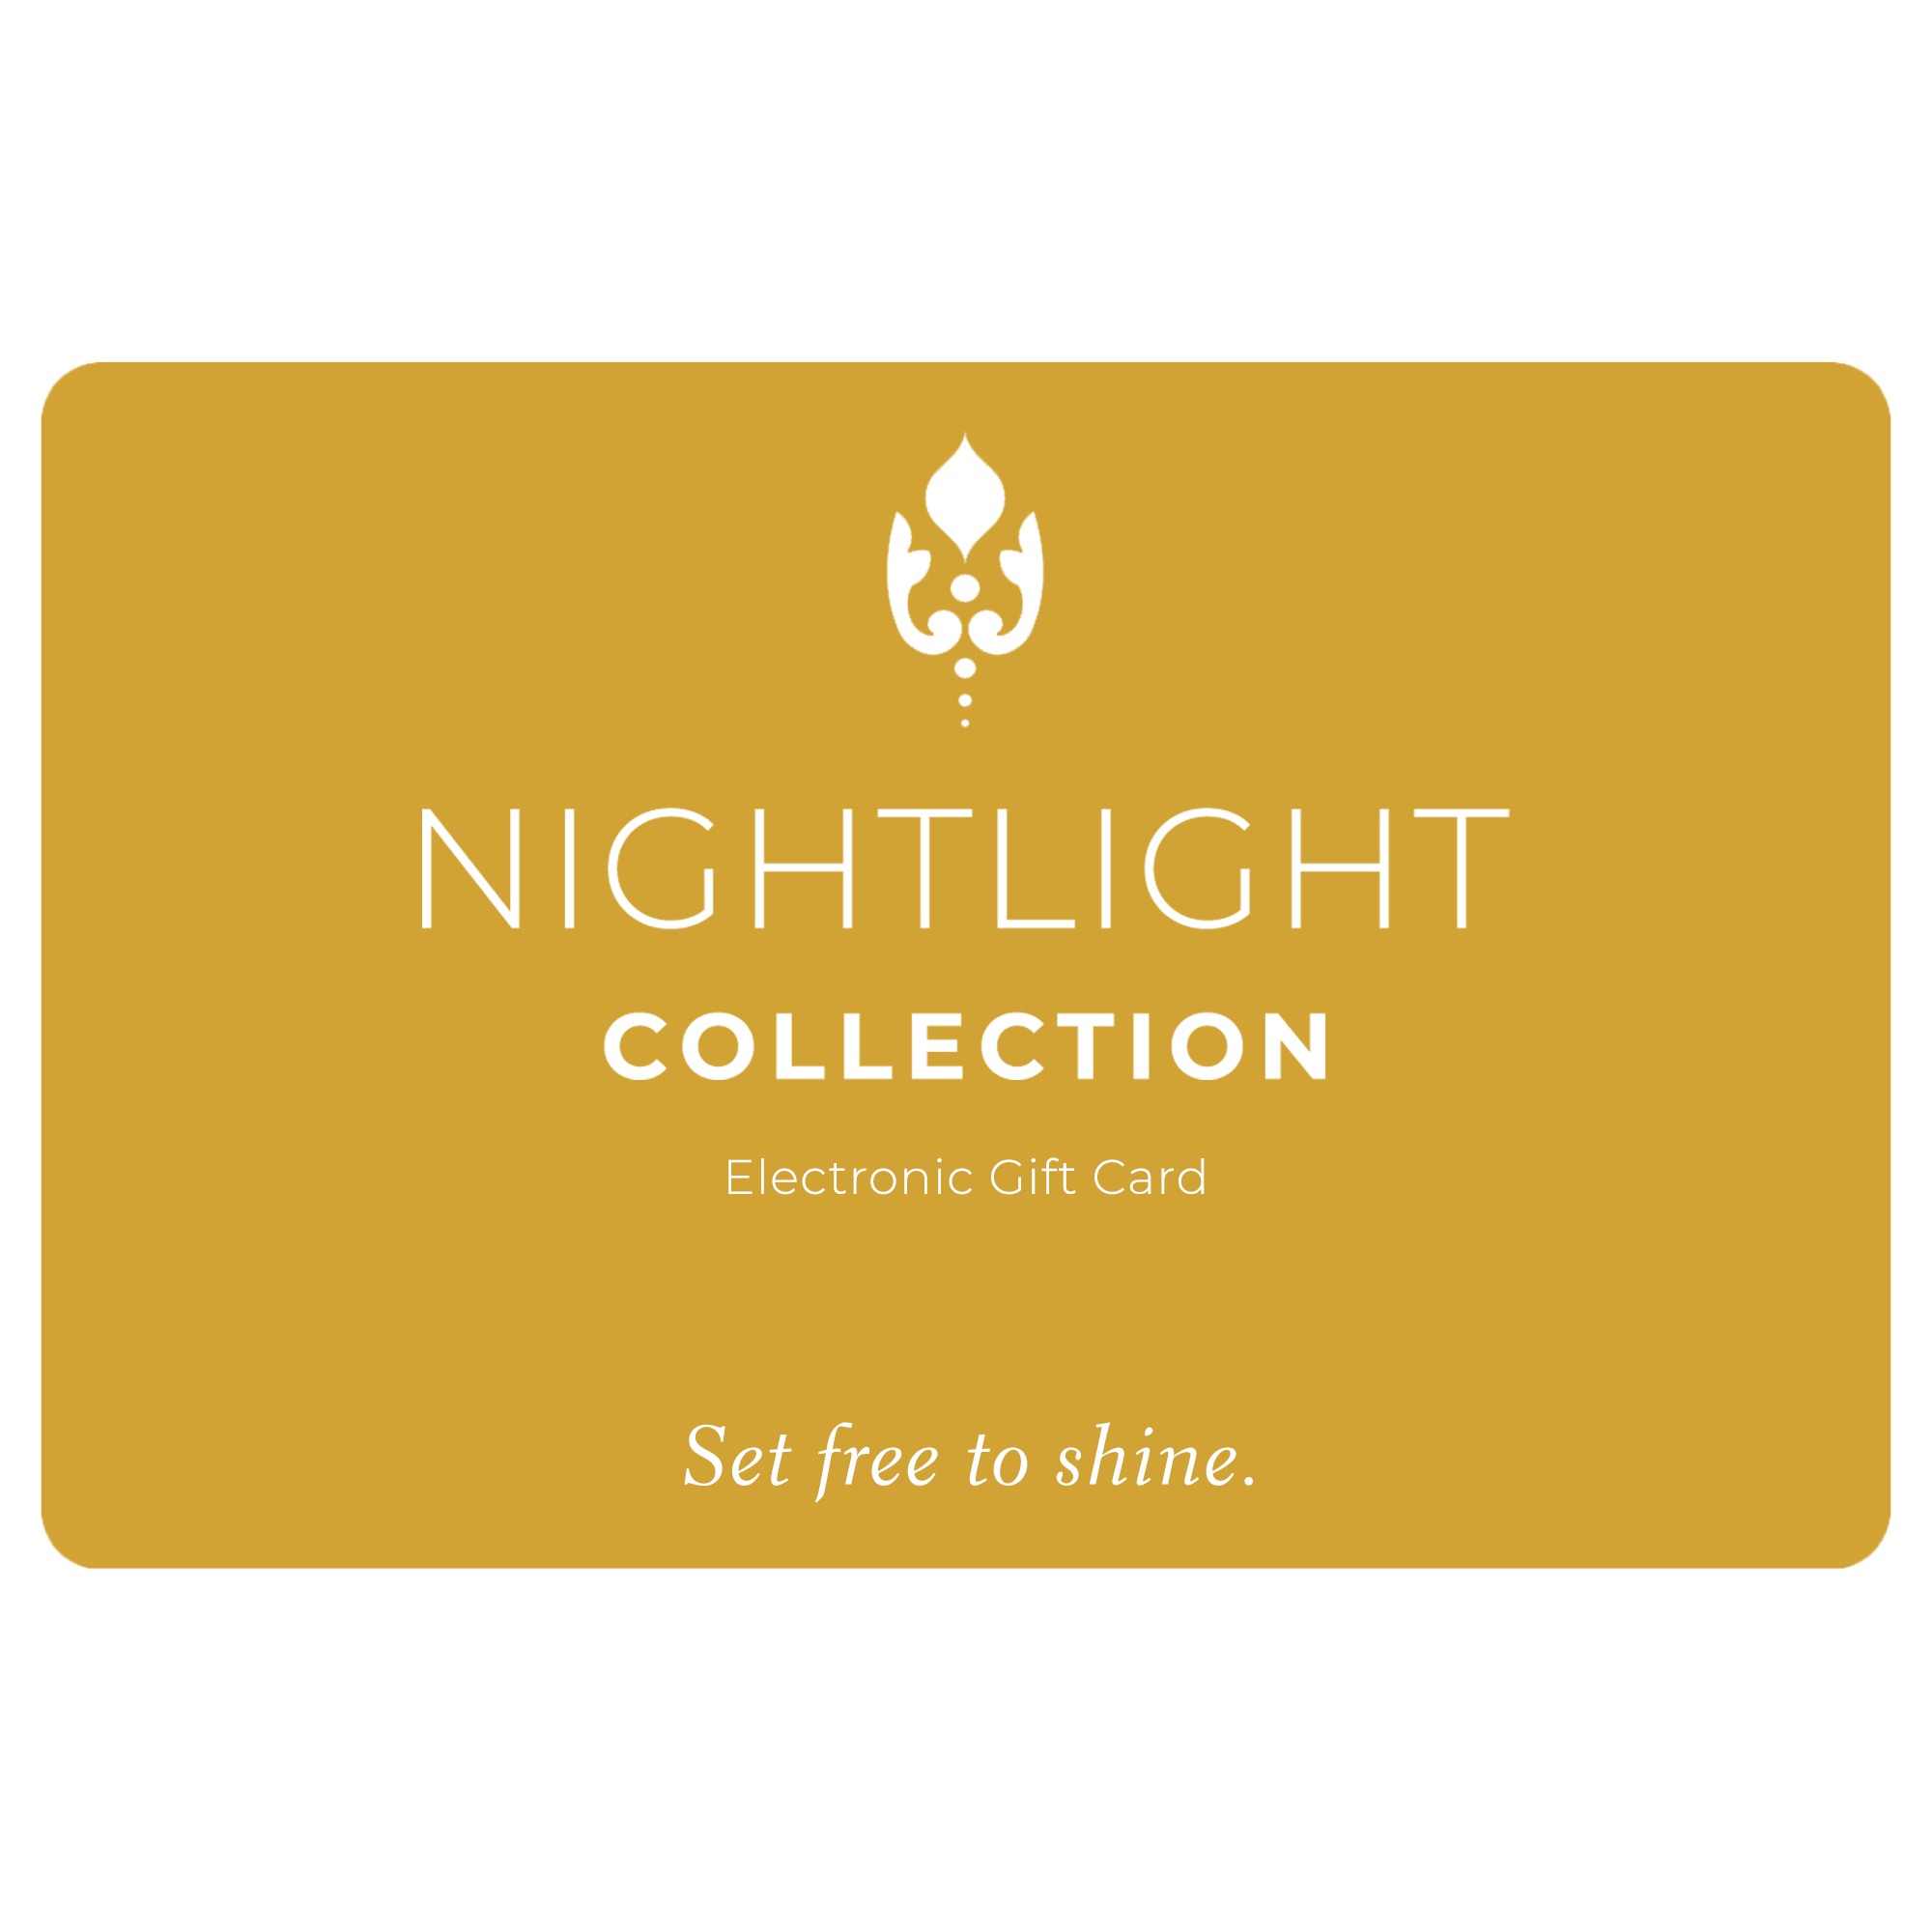 NightLight Collection E-Gift Card